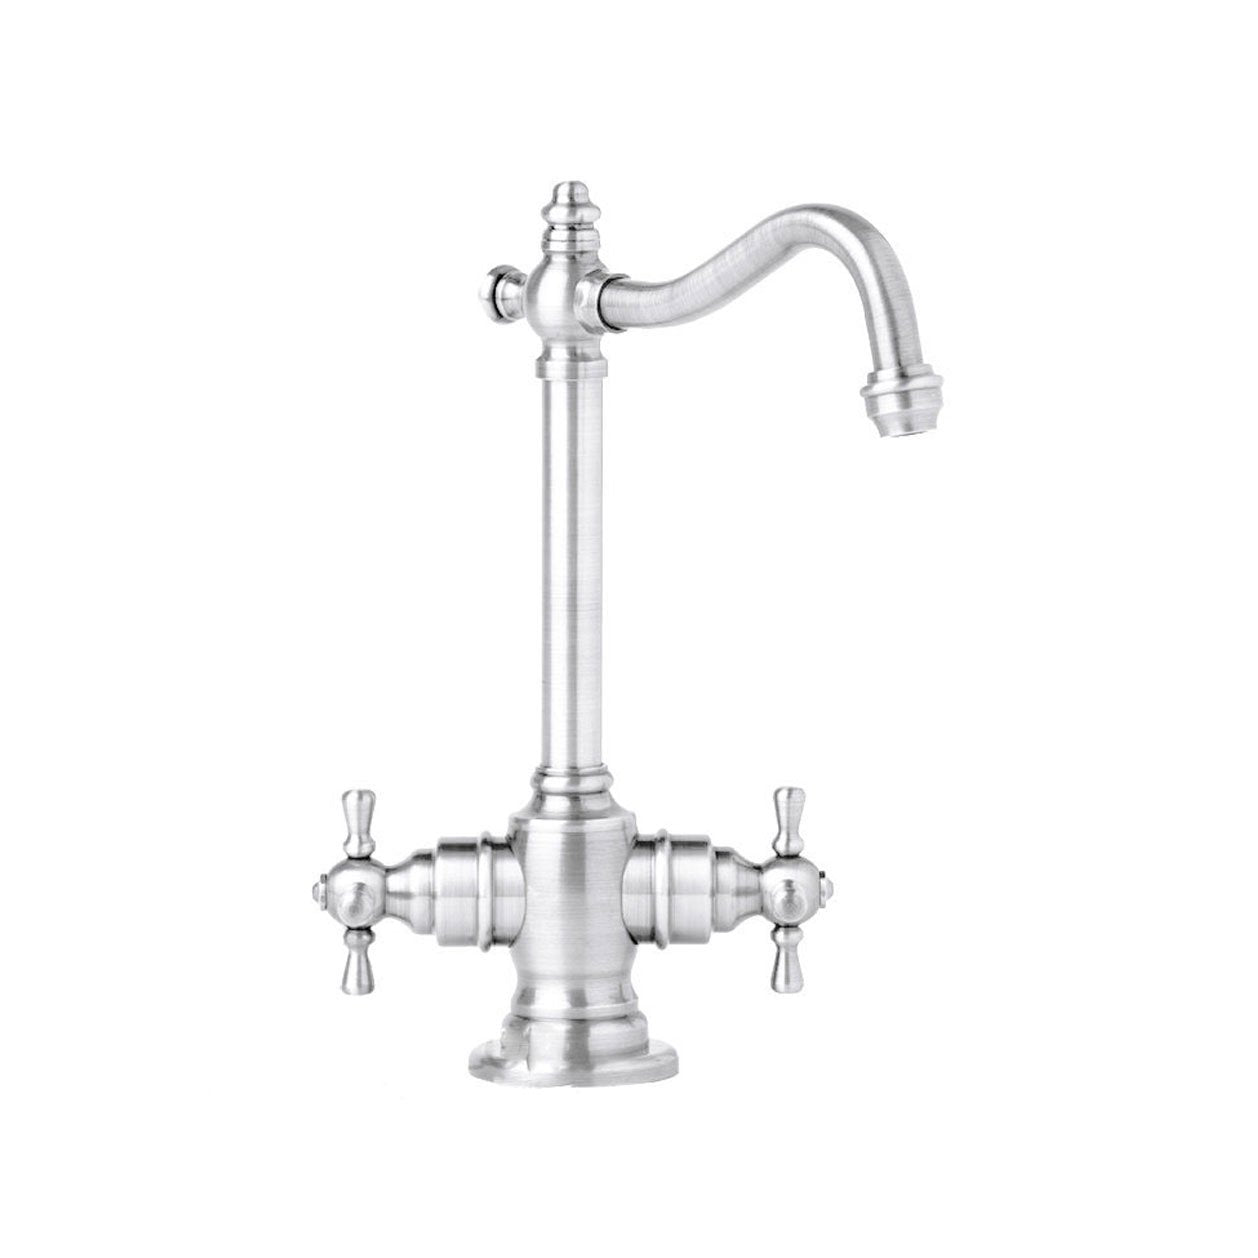 Waterstone 1150HC Annapolis Hot and Cold Filtration Faucet Cross Han –  Plumbing Overstock